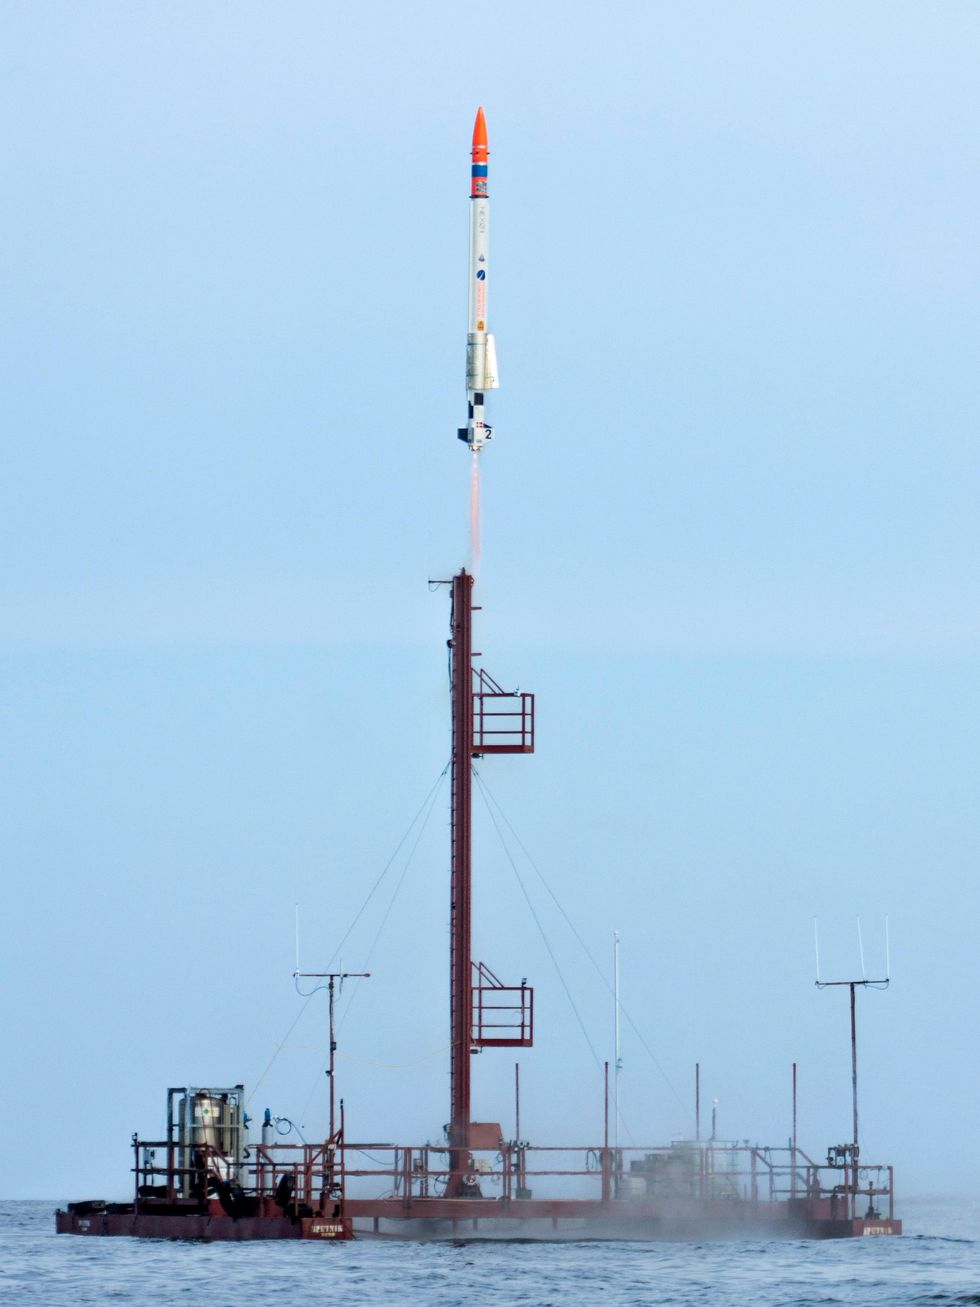 The left photo shows a launch platform floating in the water, and a rocket ascending from the launch tower into the sky.